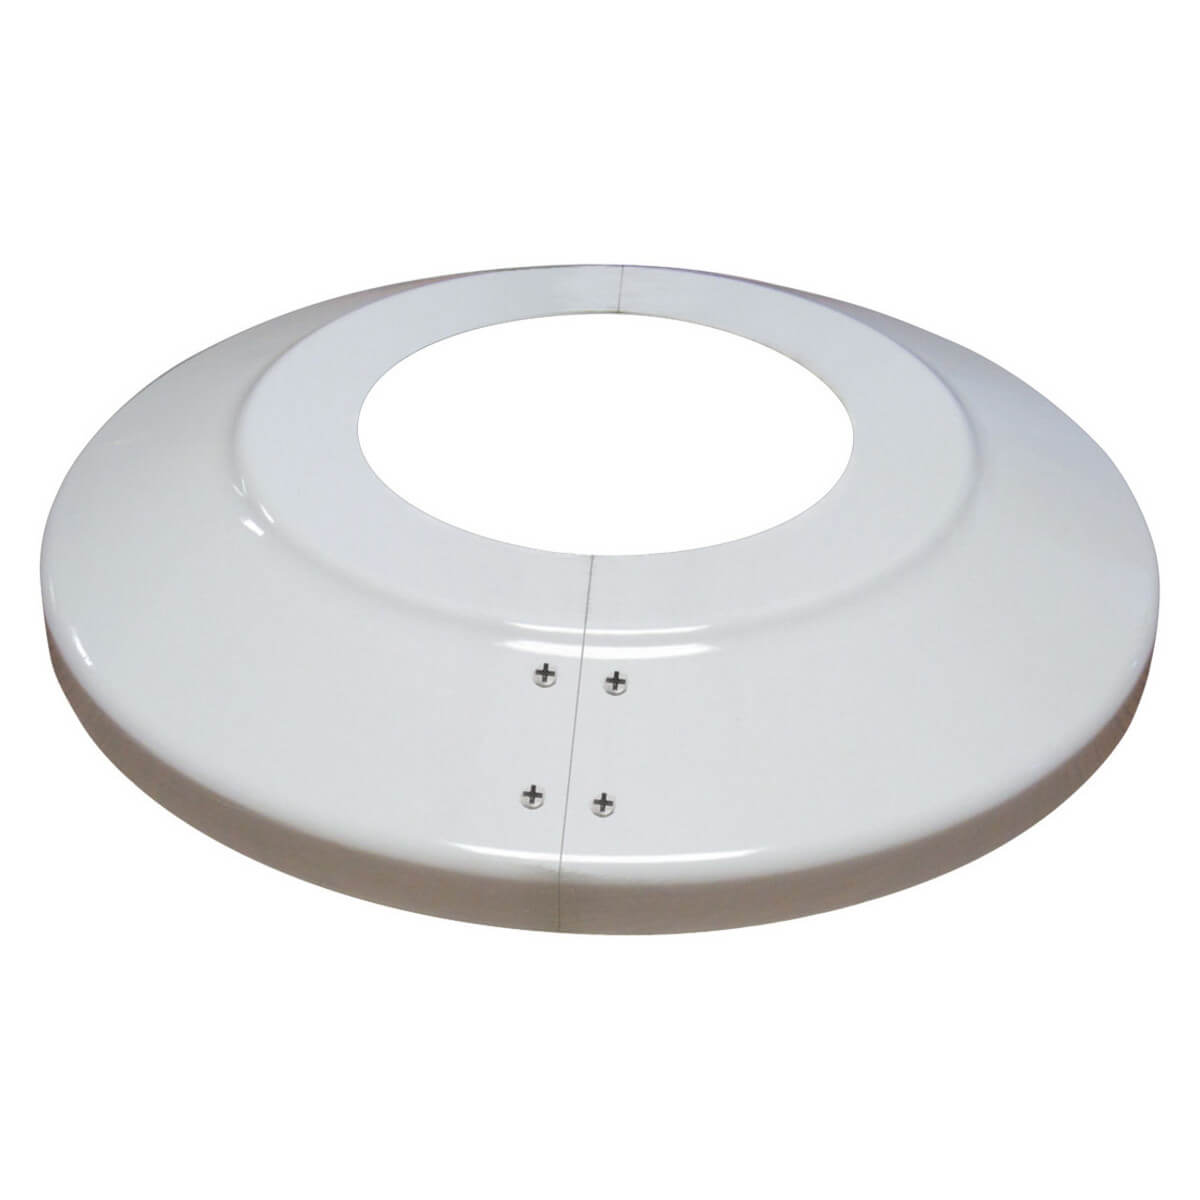 White Aluminum SPLIT Flash Collar for Flagpoles - Standard Profile -.060 Wall thickness - Assorted Sizes